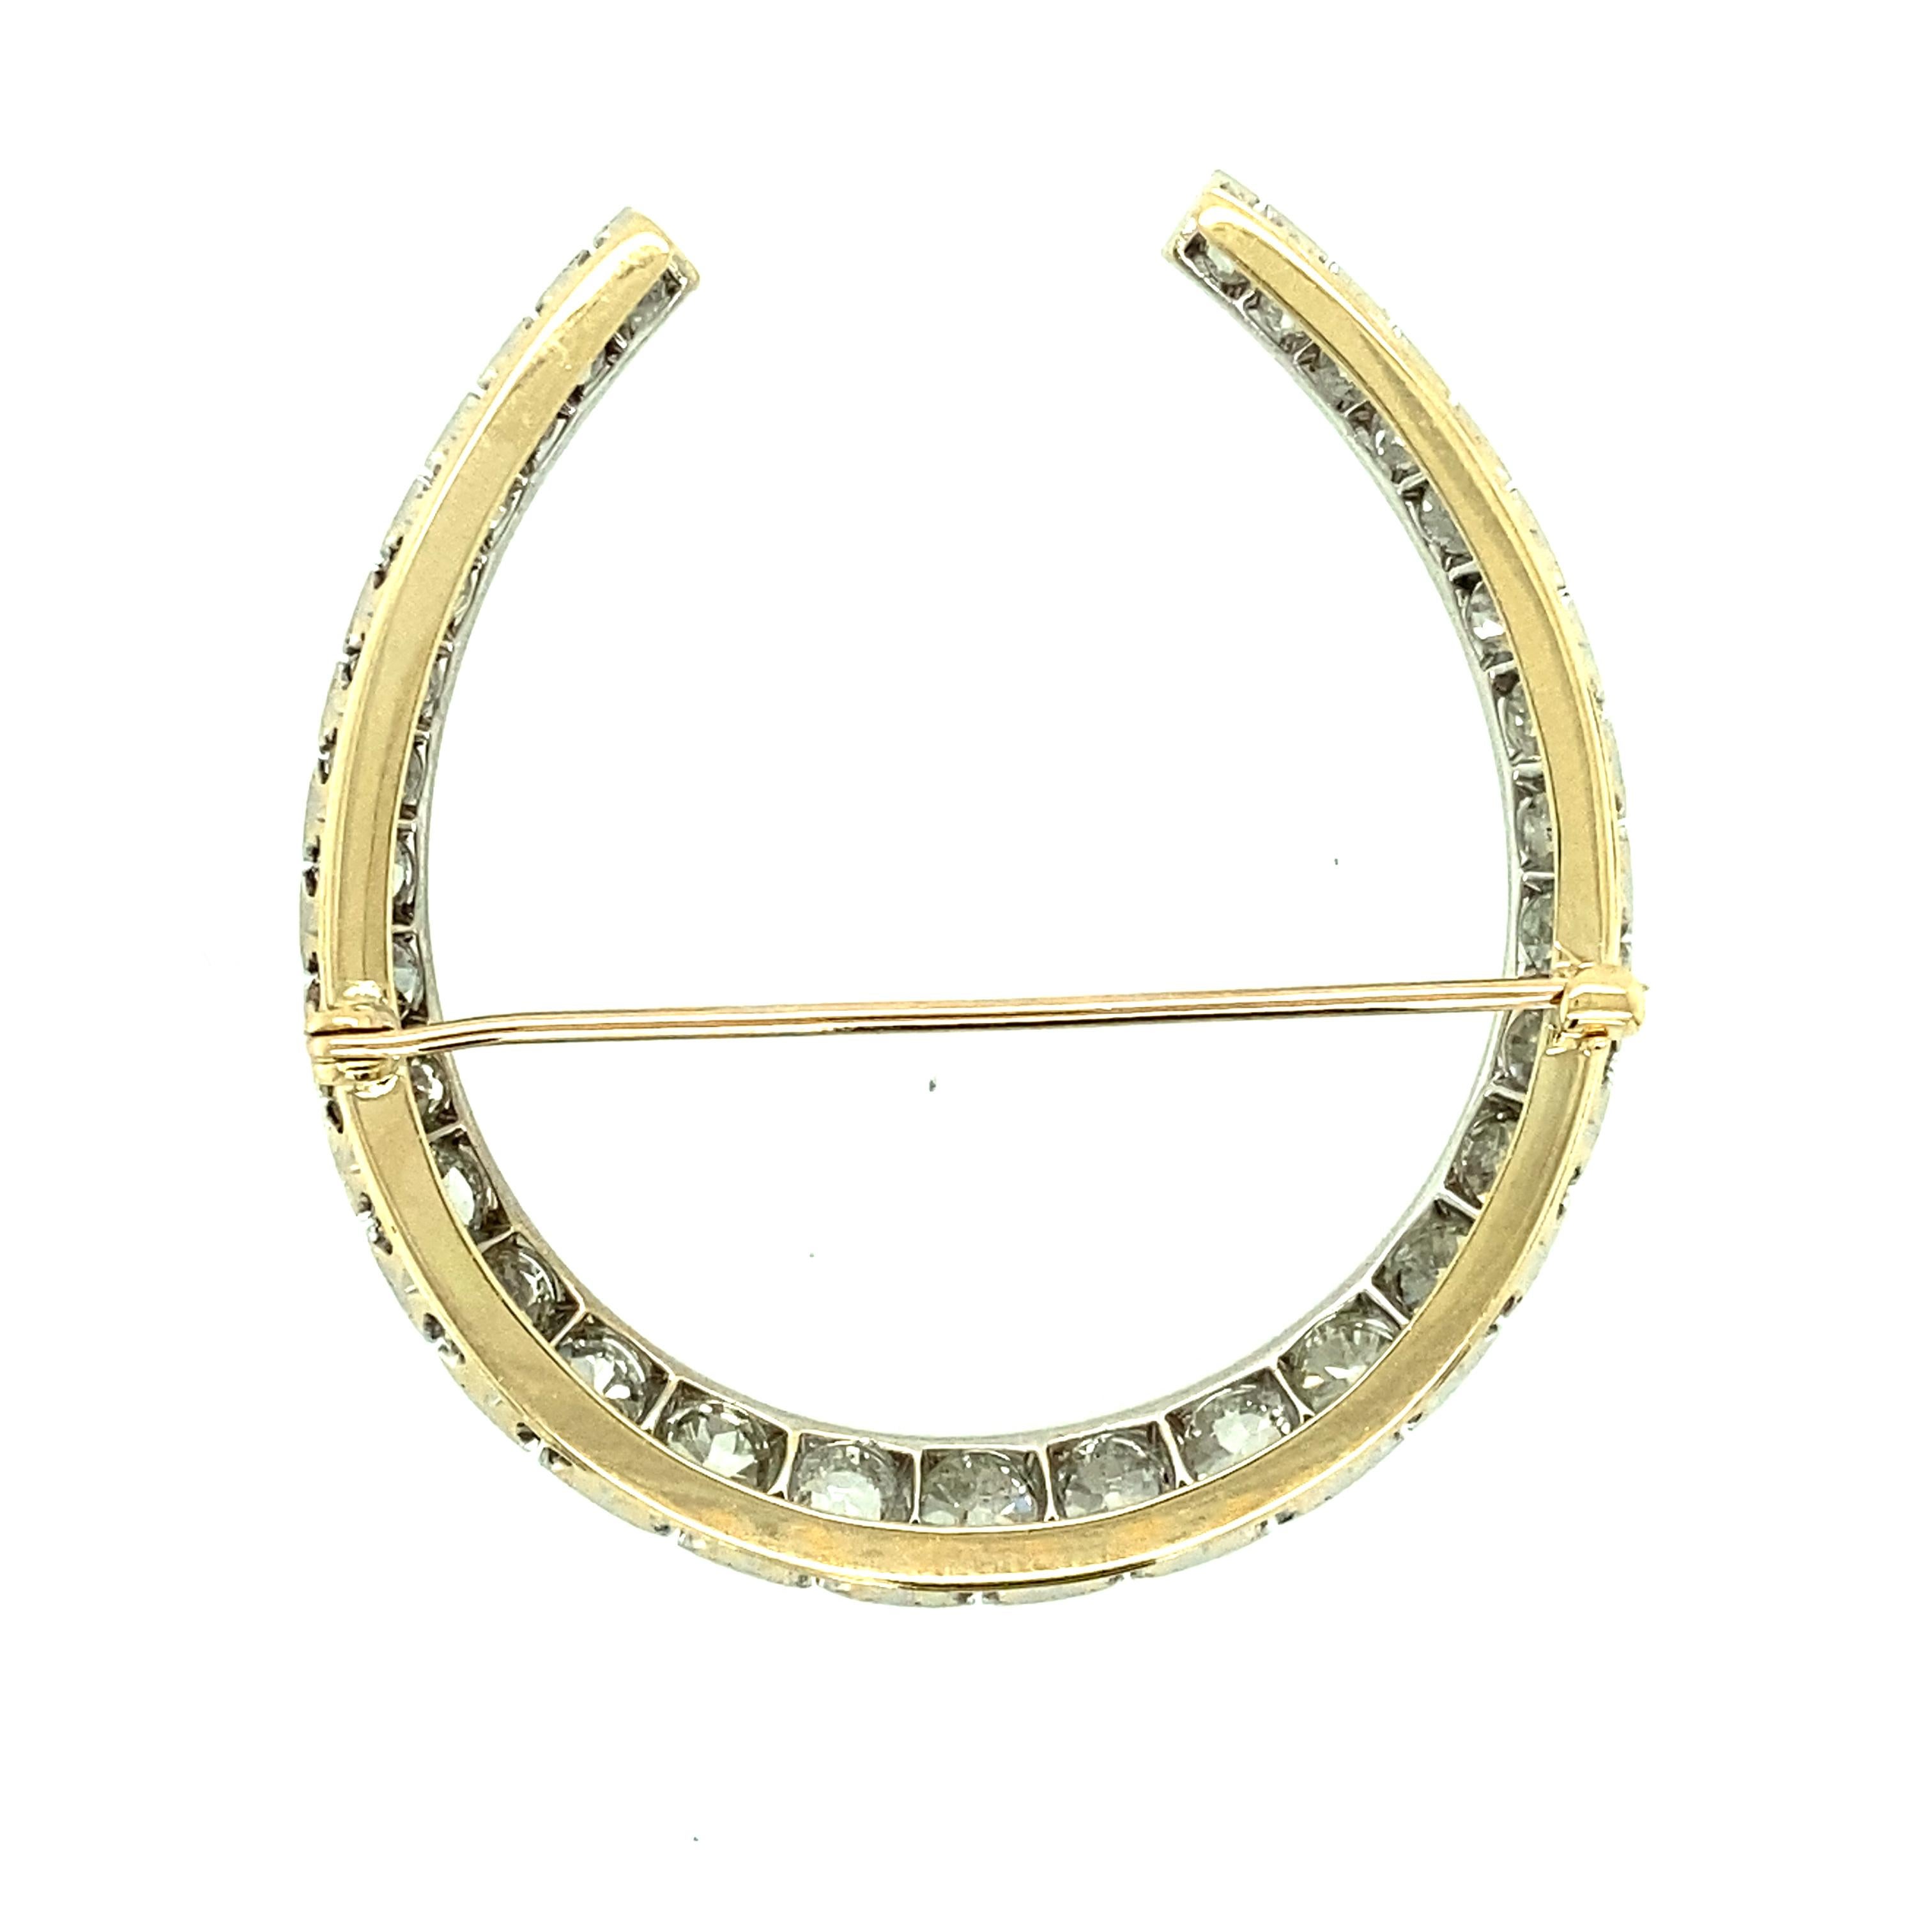 One 14 karat yellow gold and platinum estate horseshoe design pin set with thirty-two Old Mine cut diamonds, approximately 6.5 carat total weight with matching J/K color and VS/SI1 clarity.  The pin measures 2 inches long and is complete with a